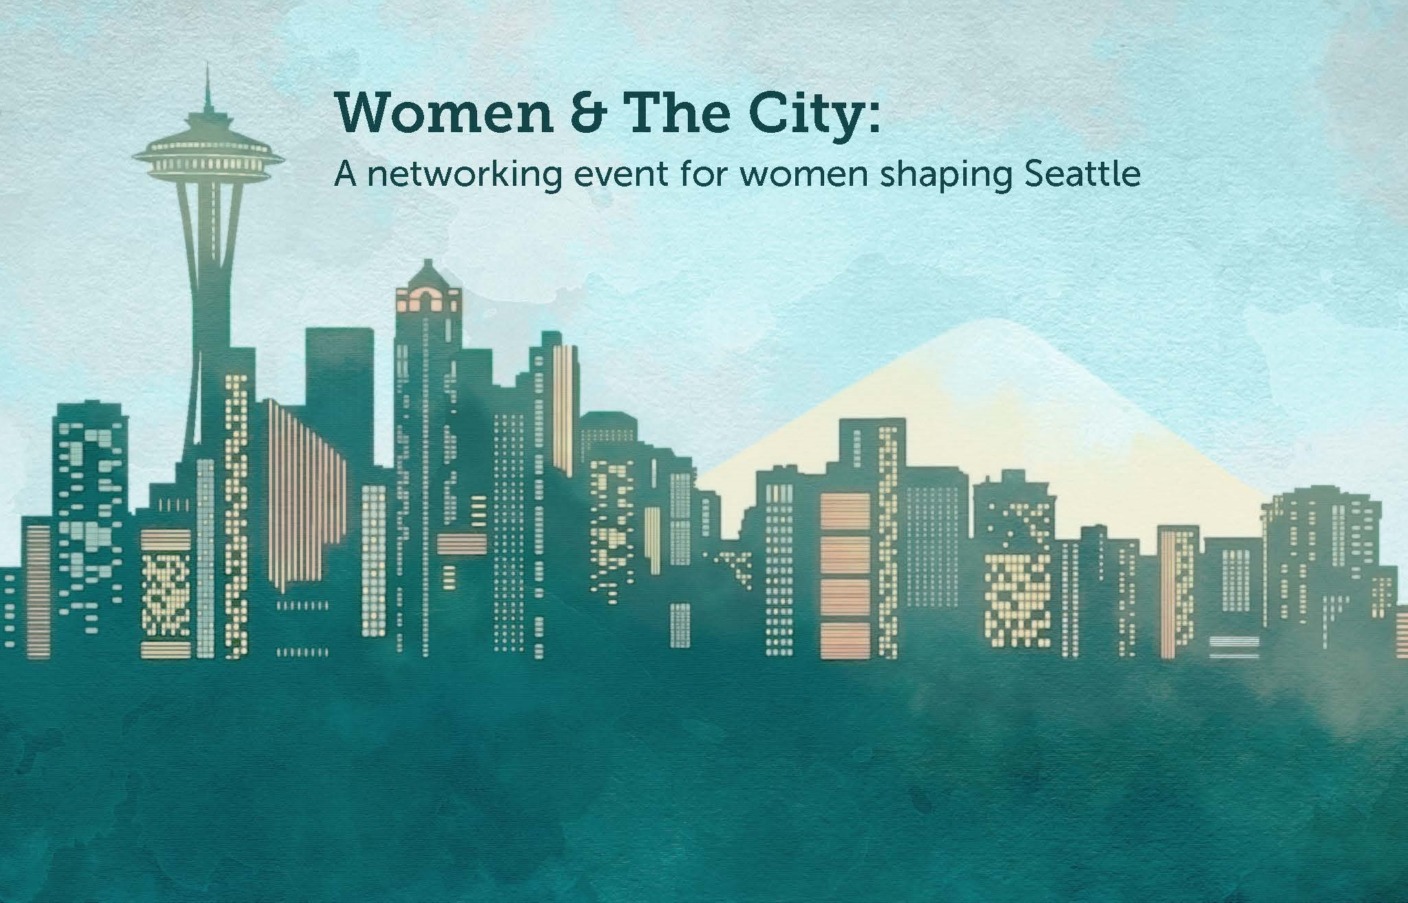 Join AIA Seattle Women in Design, WASLA, and the APA Women & Planning Division for an event about the women shaping our city!